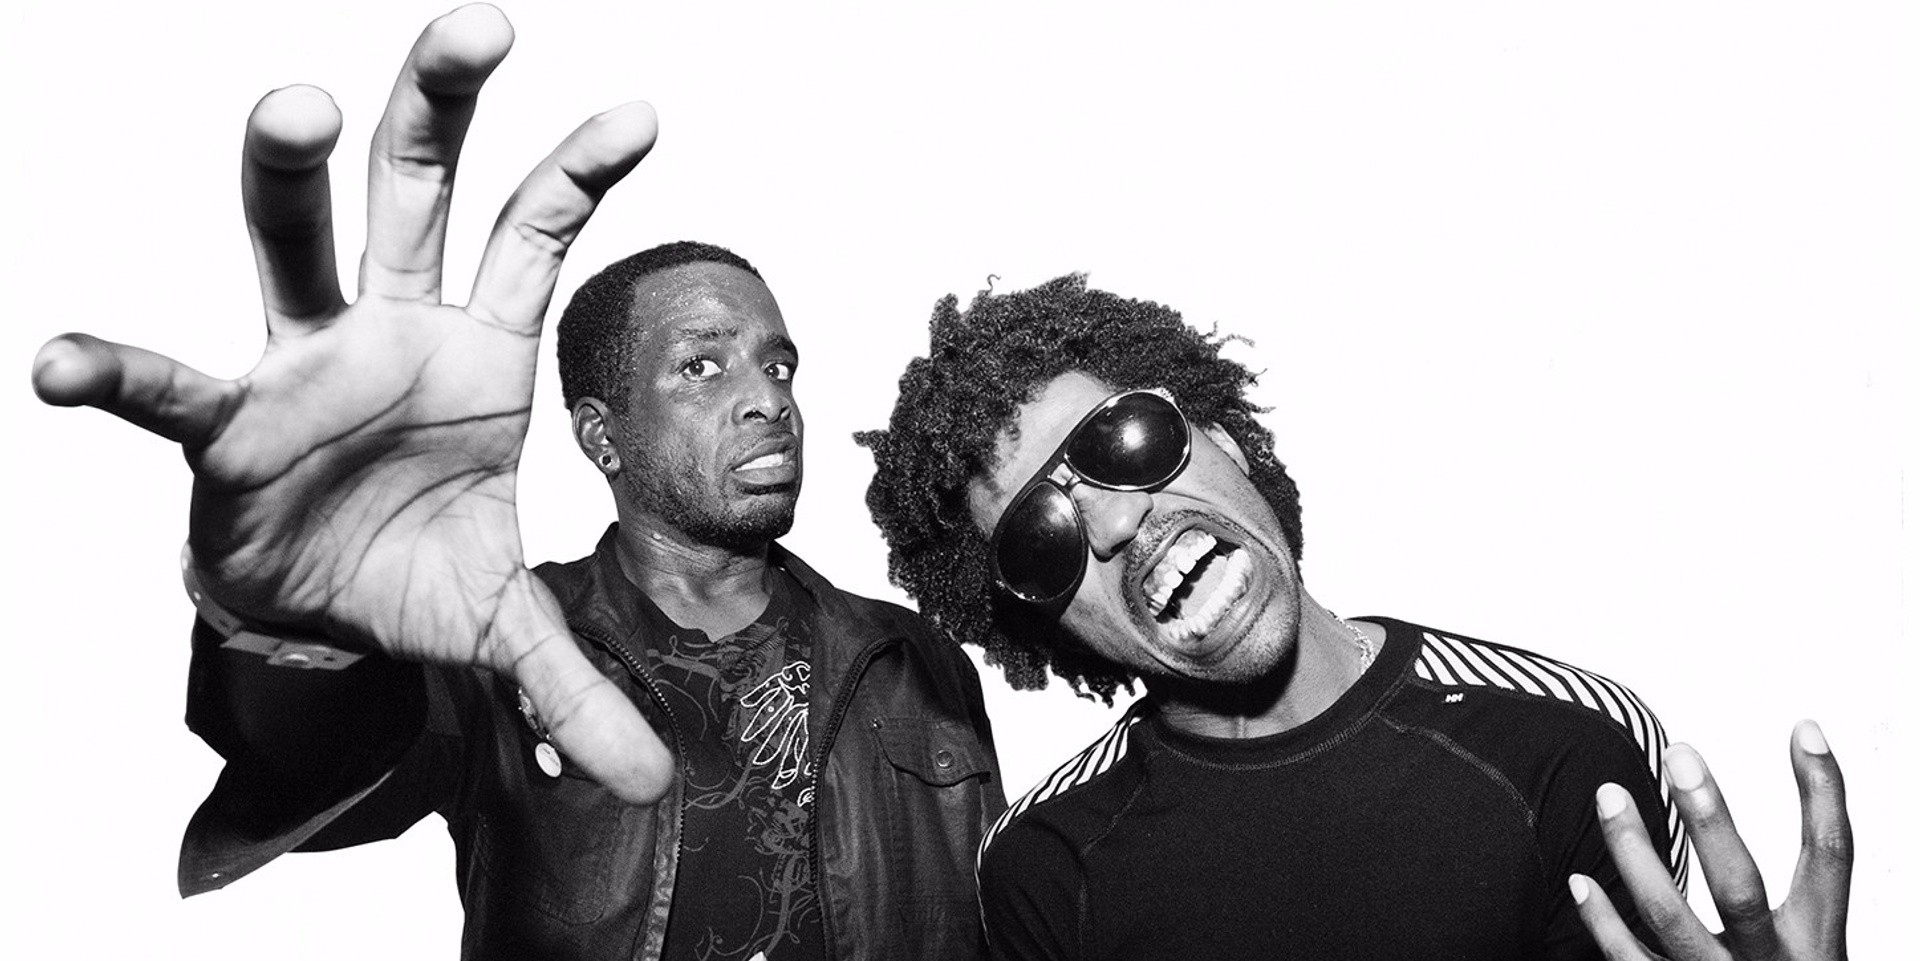 The Pharcyde brings their bizarre ride back to Singapore